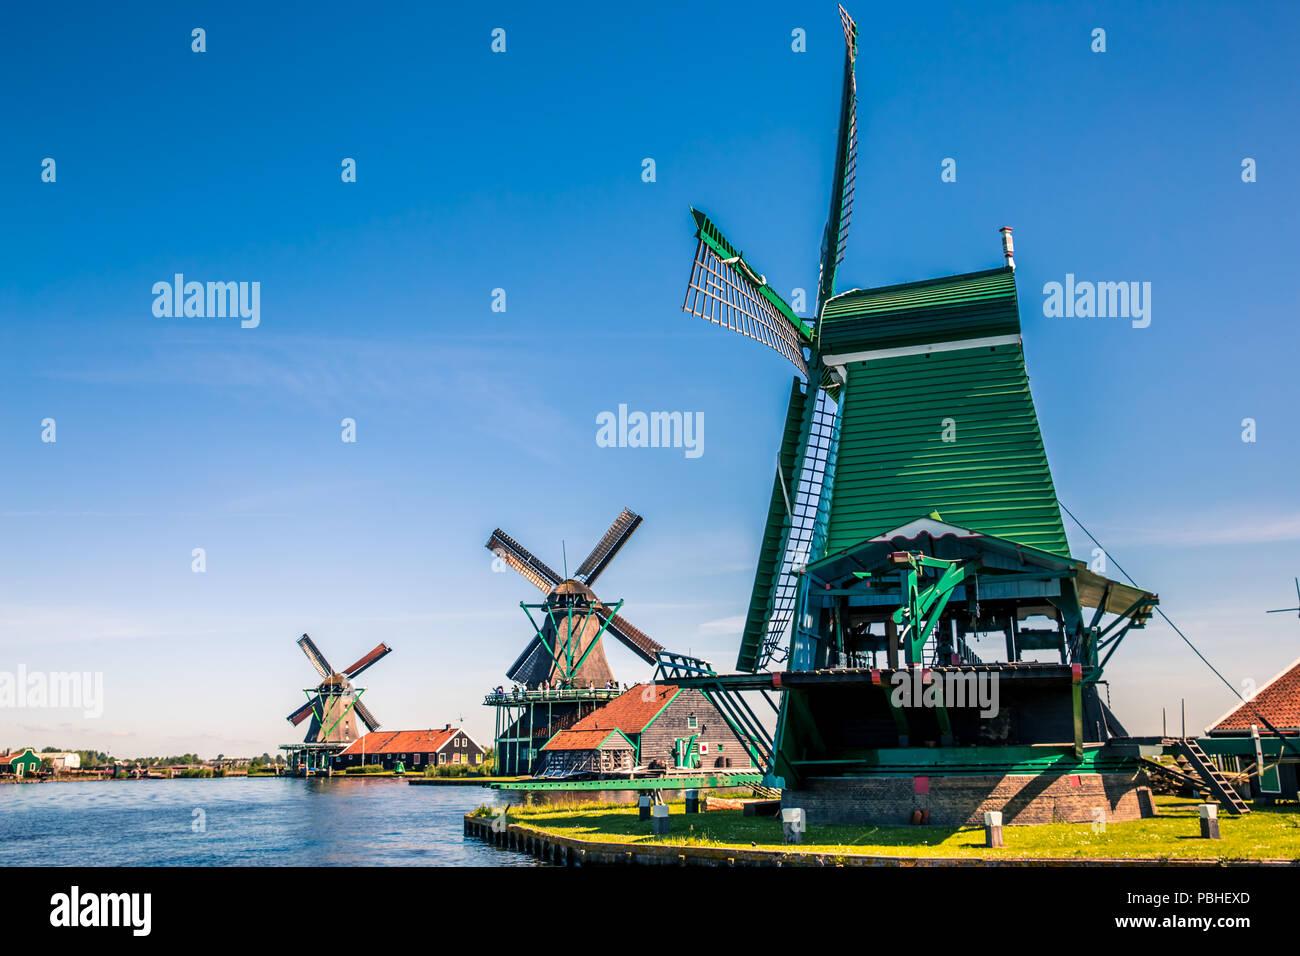 Traditional dutch windmills located by the river Zaan, in Zaanse Schans, Netherlands. Stock Photo